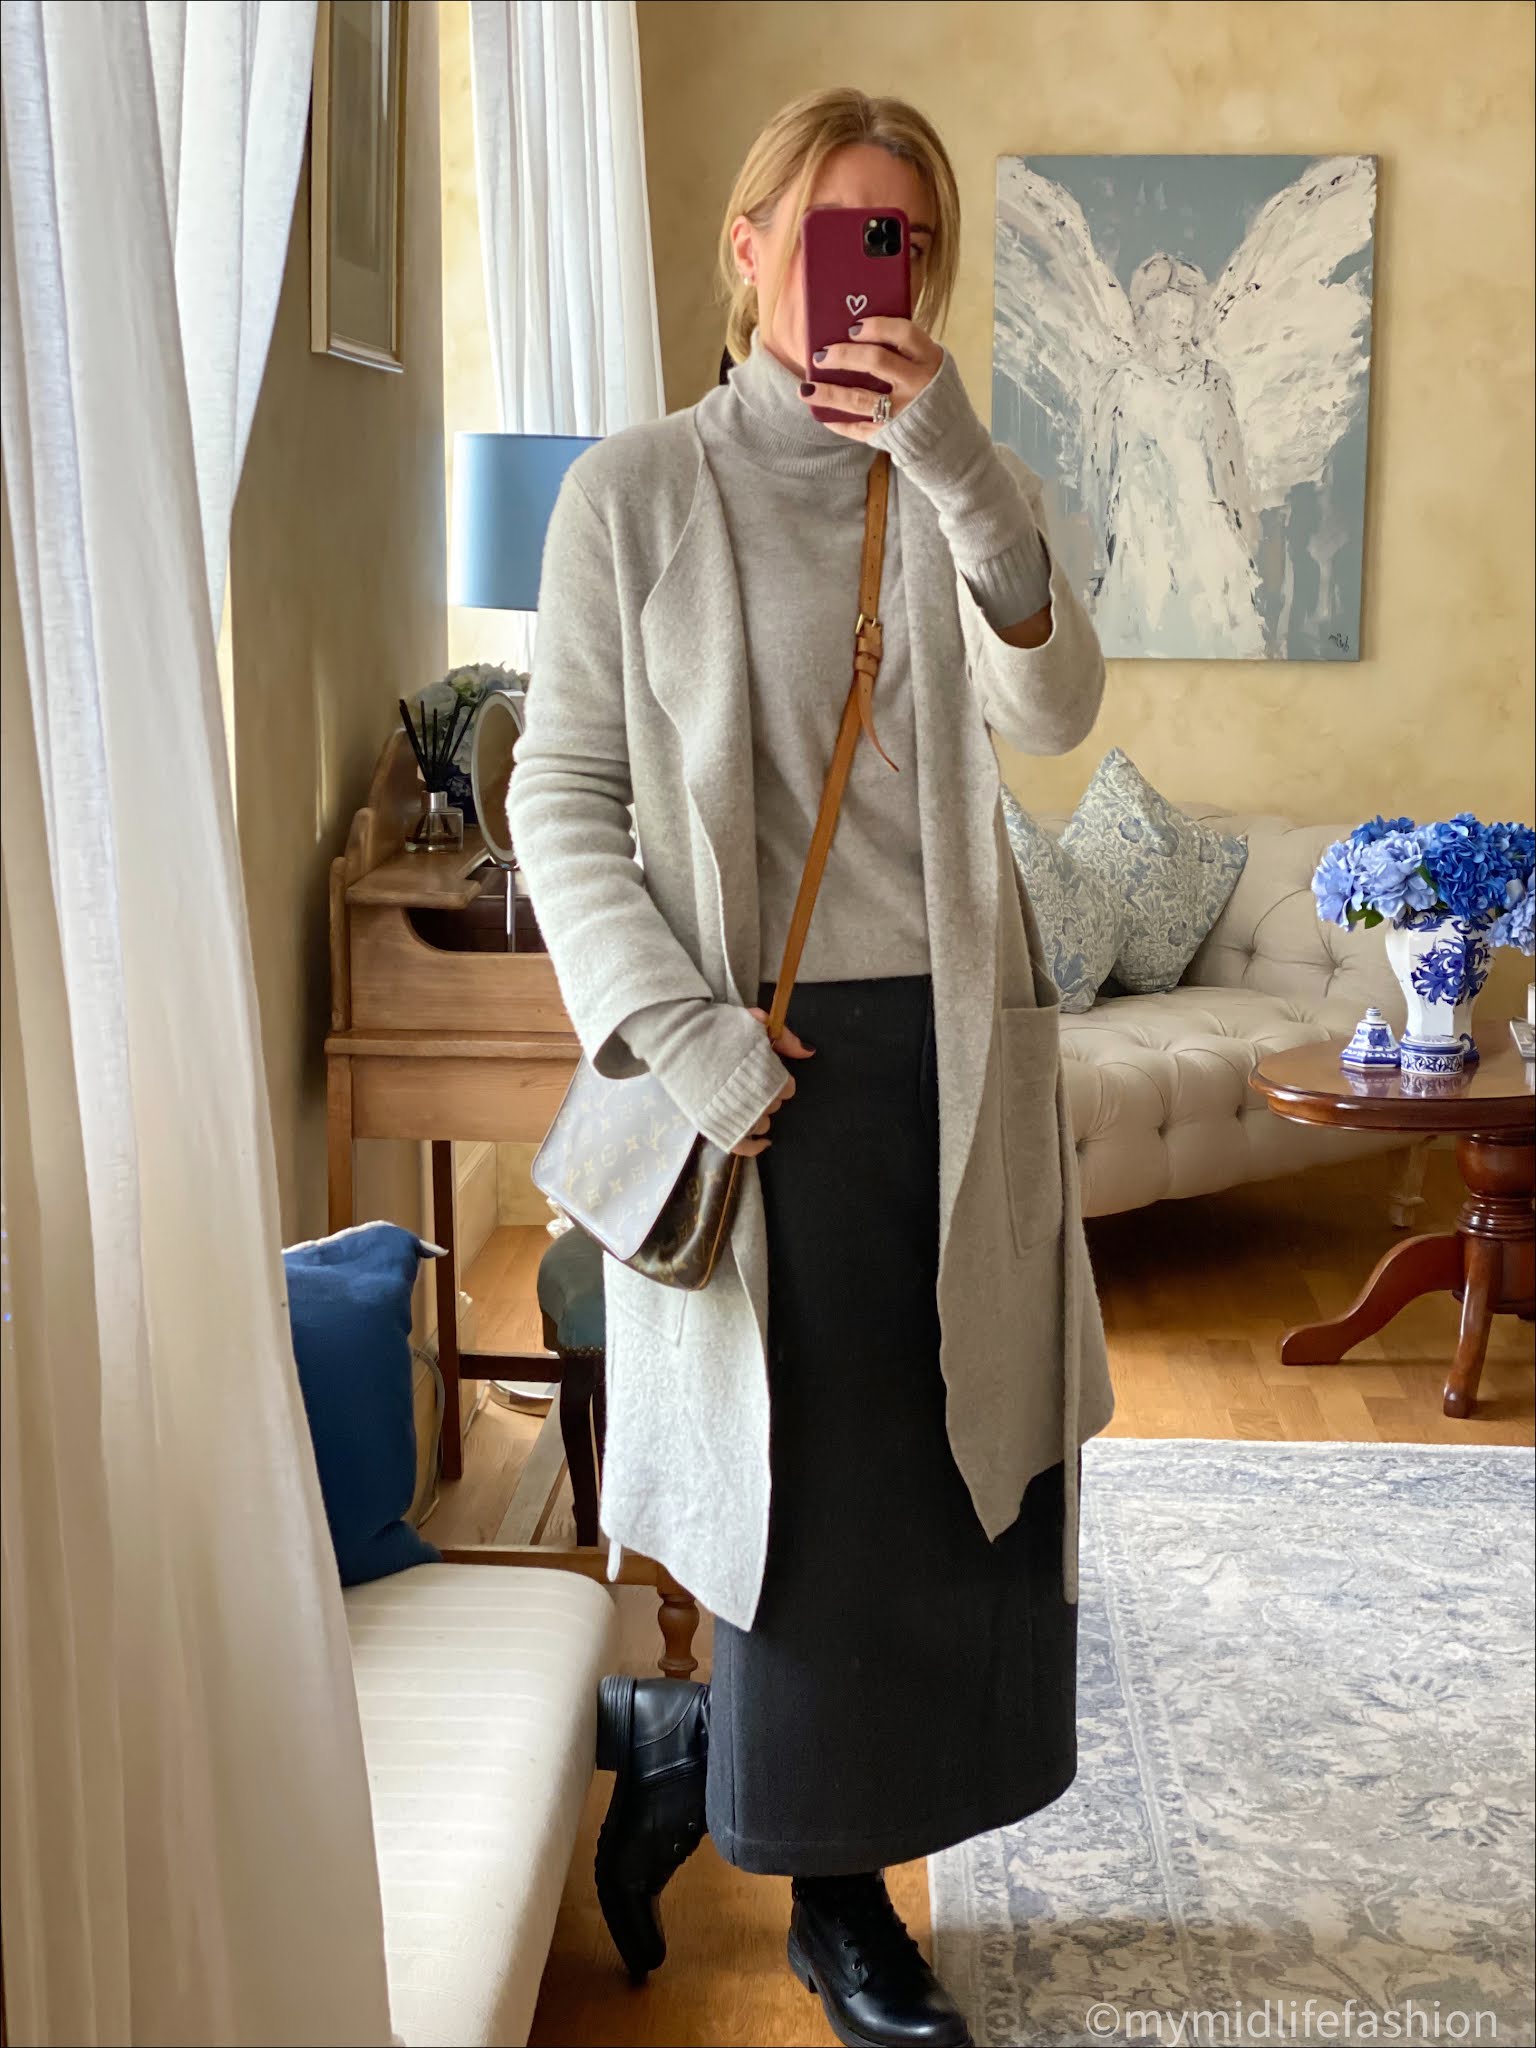 my midlife fashion, carl scrape paulette black lace up ankle boots, Joseph knitted coatigan, marks and Spencer Pure cashmere roll neck jumper, Louis Vuitton cross body bag, raey straight skirt, black cashmere fingerless gloves